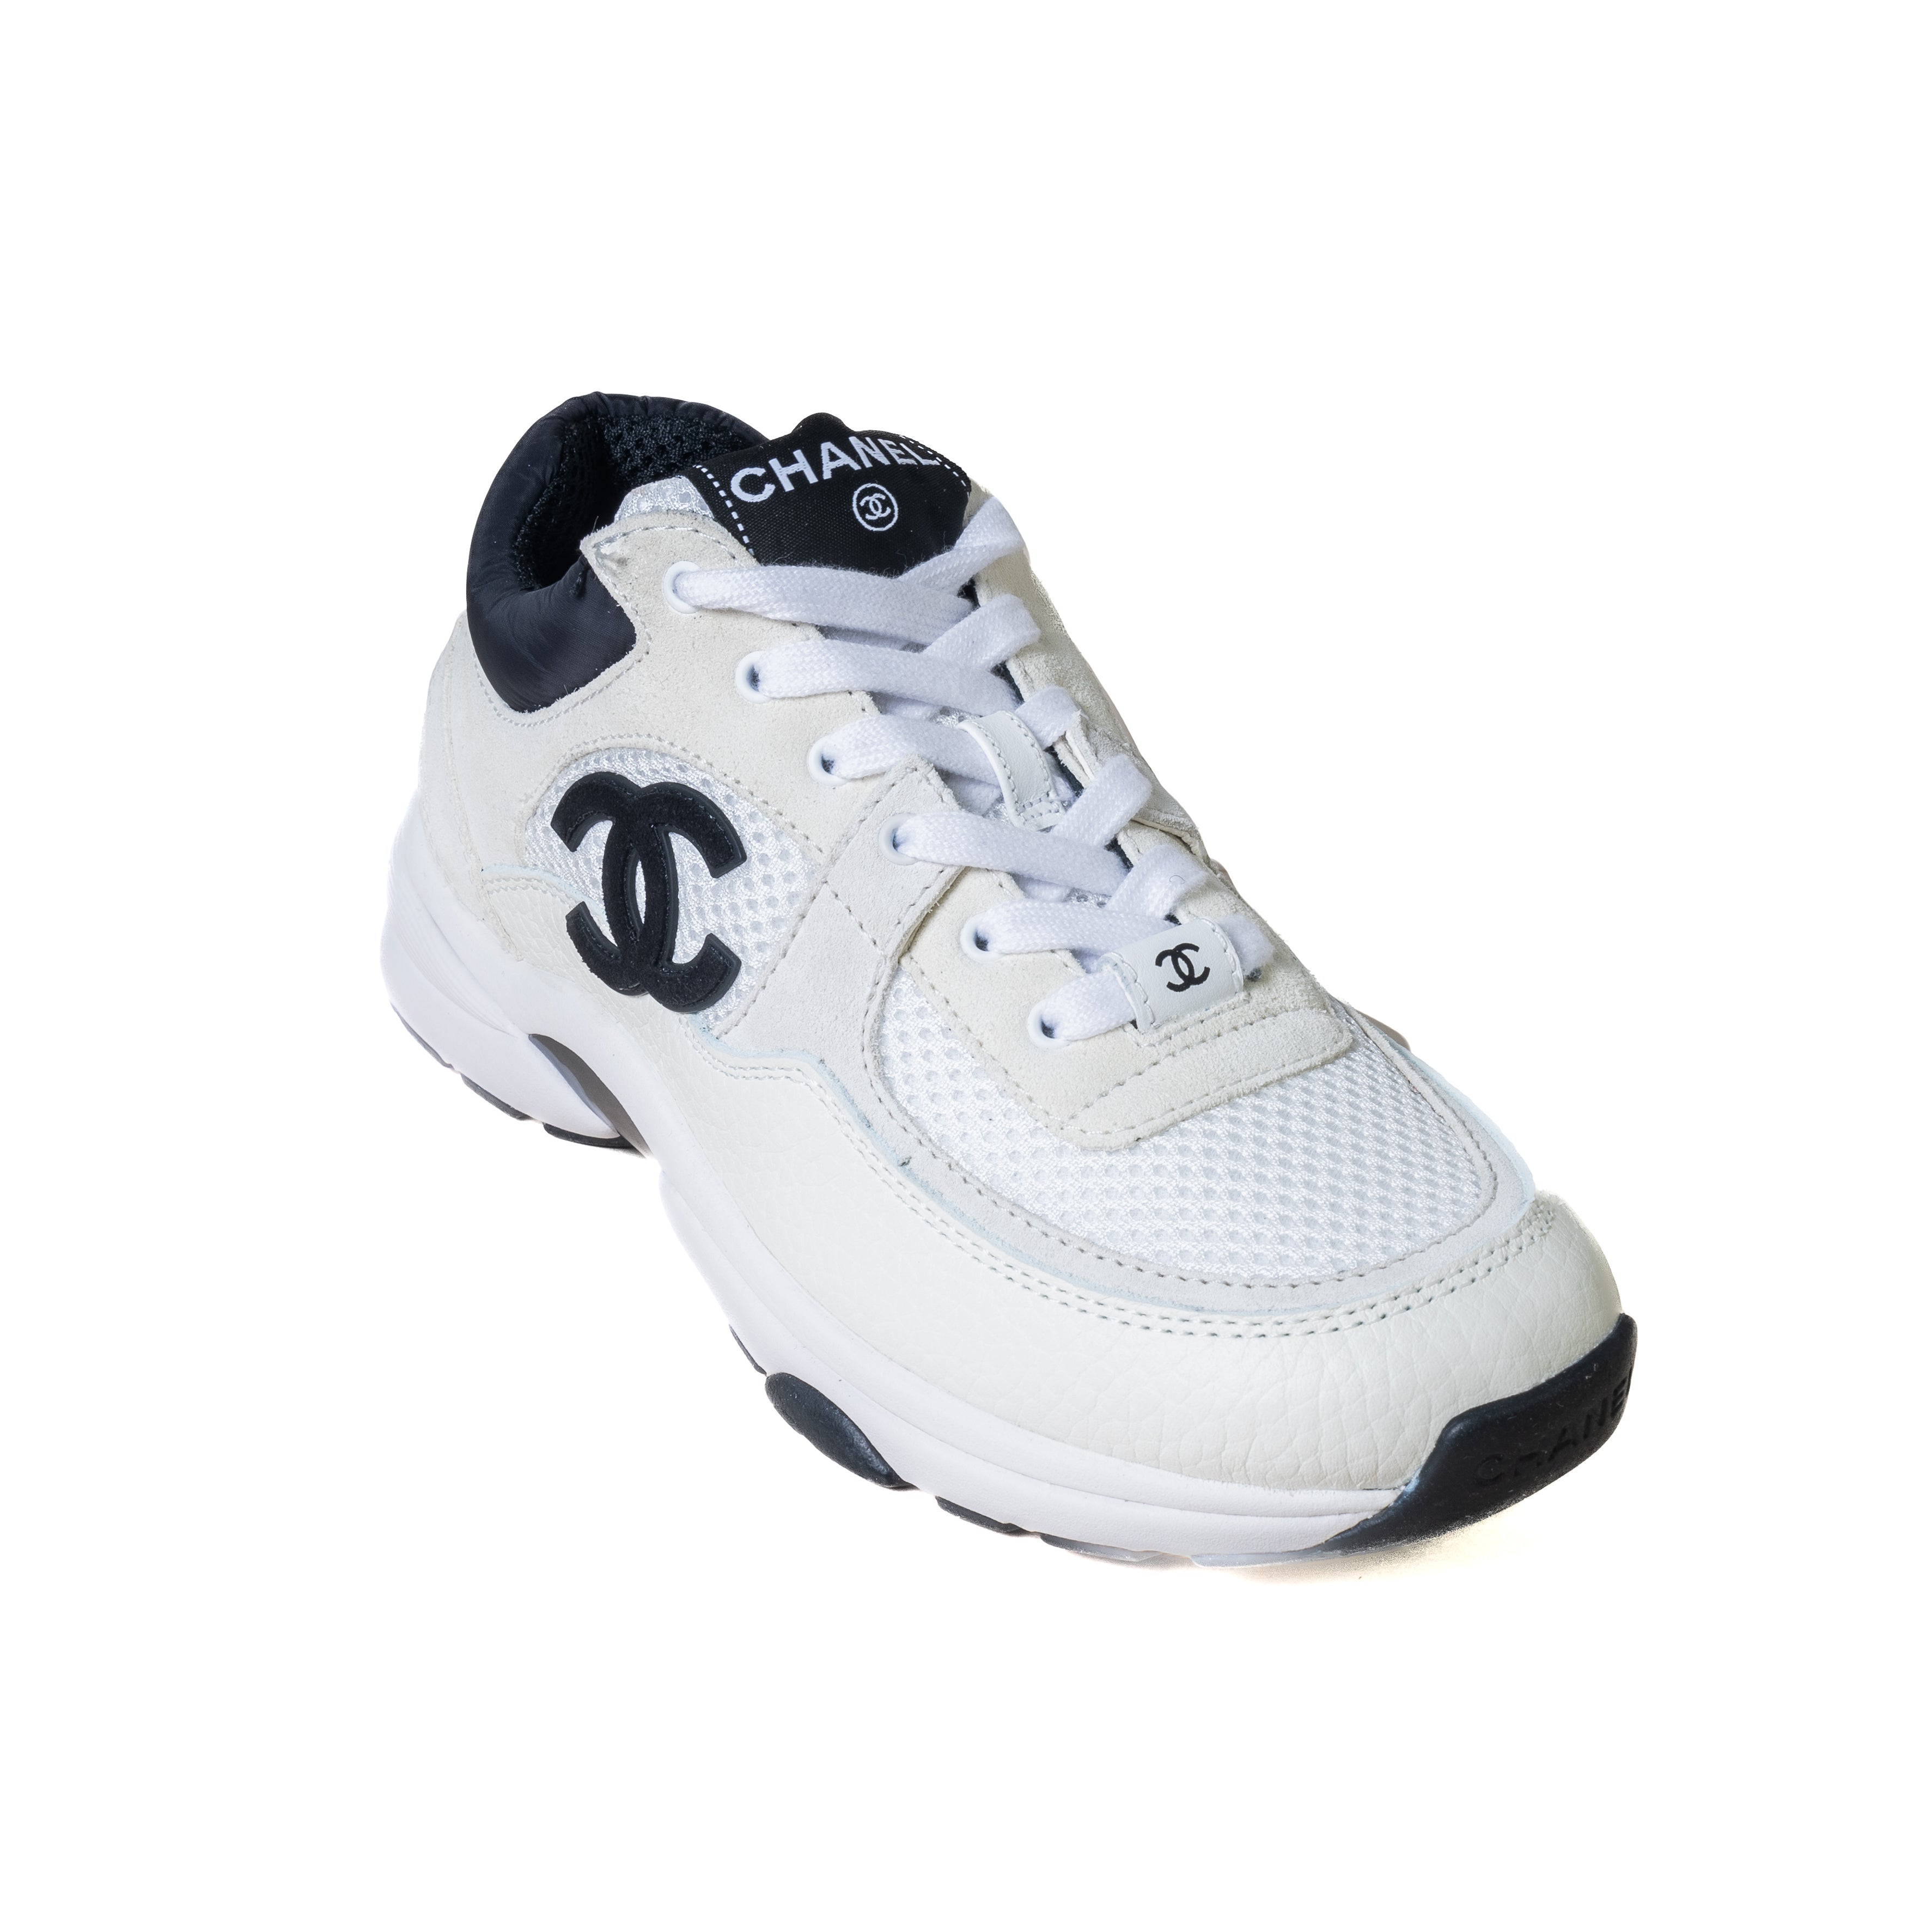 CHANEL Gray Leather Athletic Shoes for Women for sale